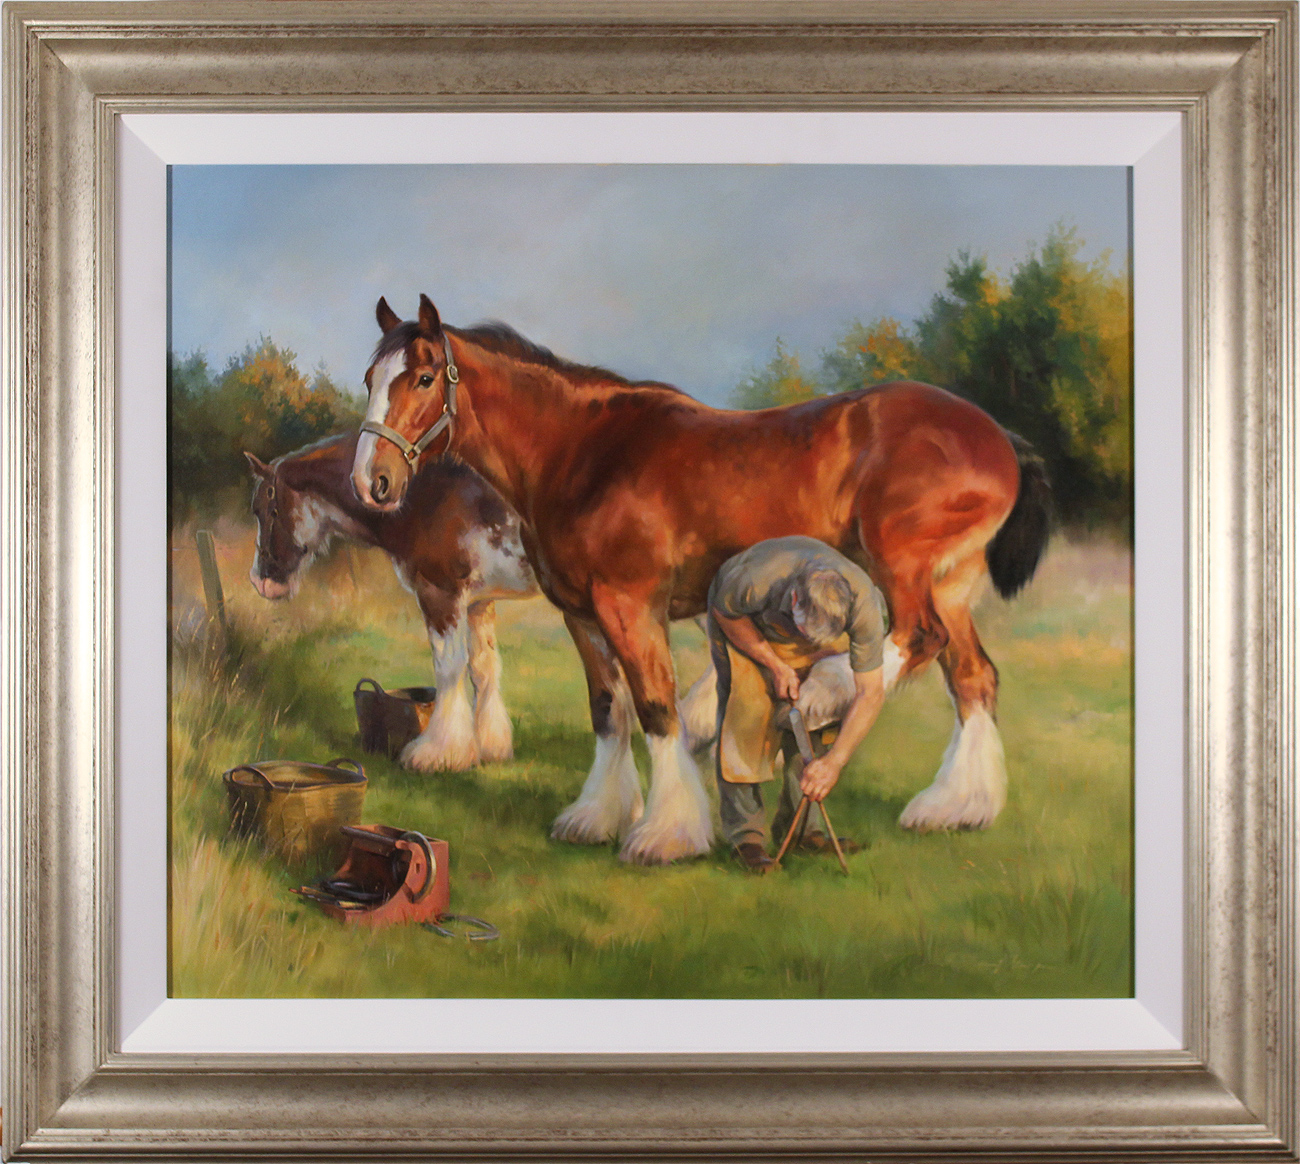 Jacqueline Stanhope, Original oil painting on canvas, The Farrier